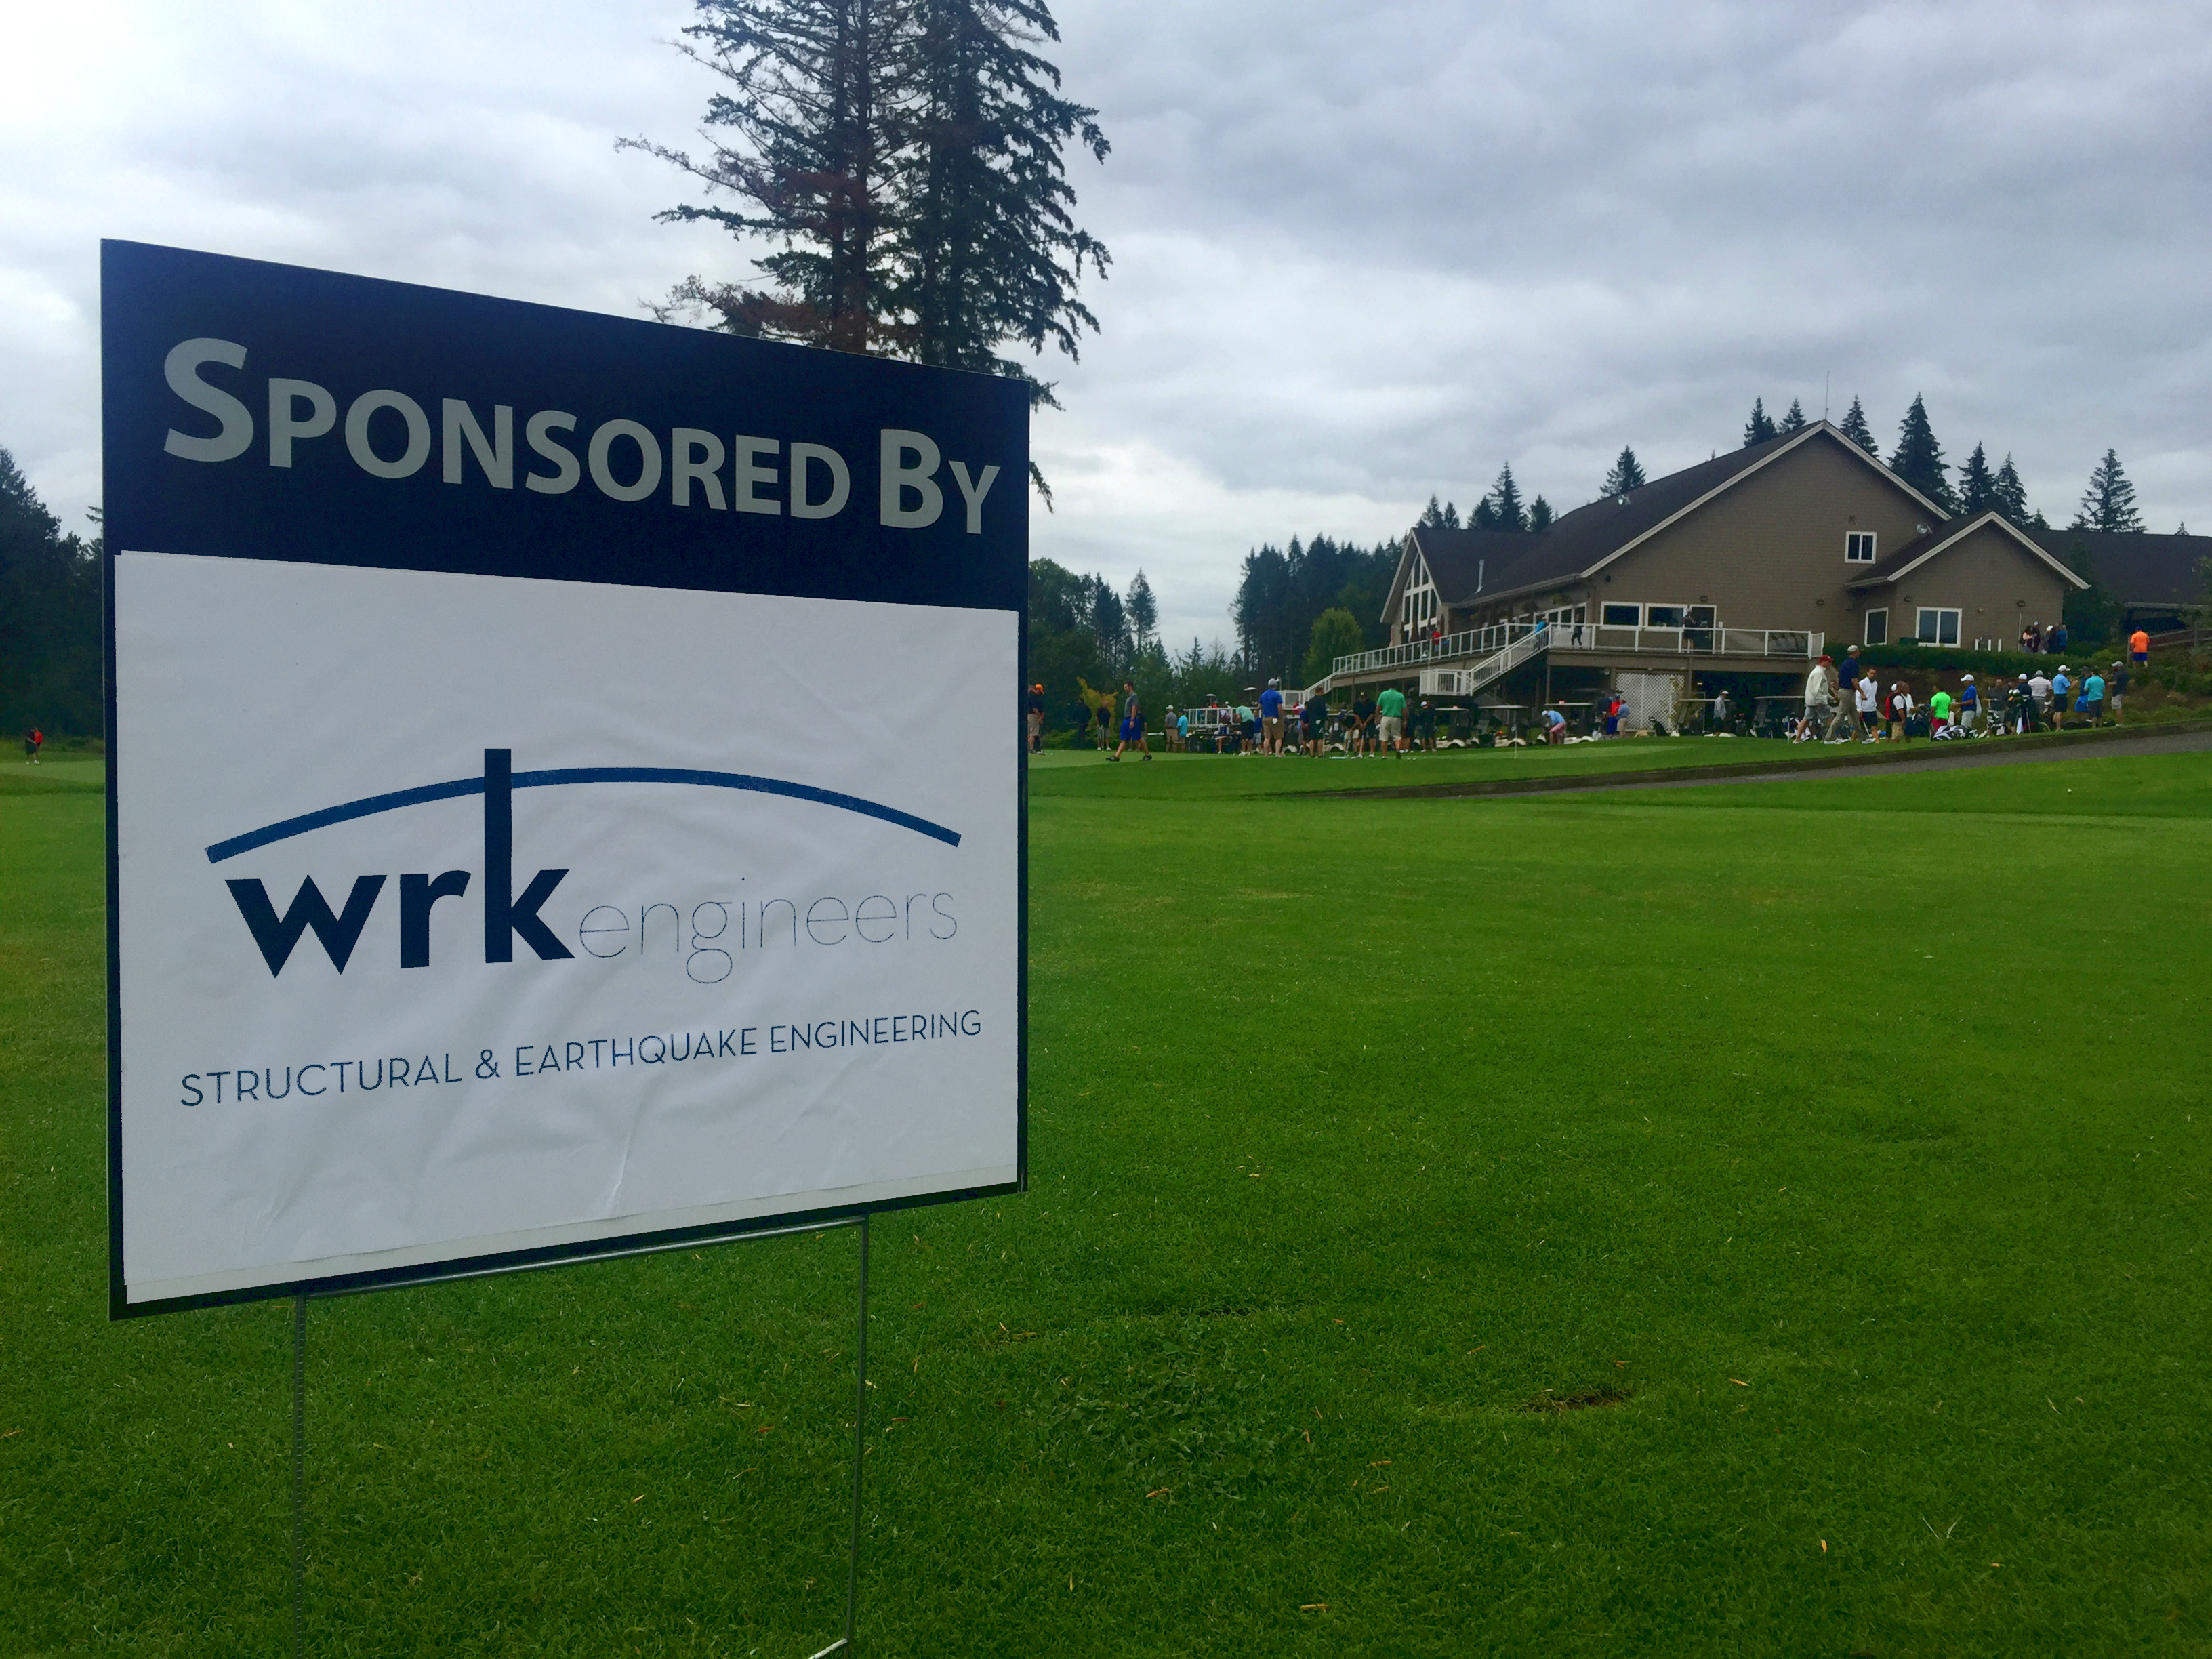 "Sponsored by WRK Engineers" sign on golf tee box at Camas Meadows